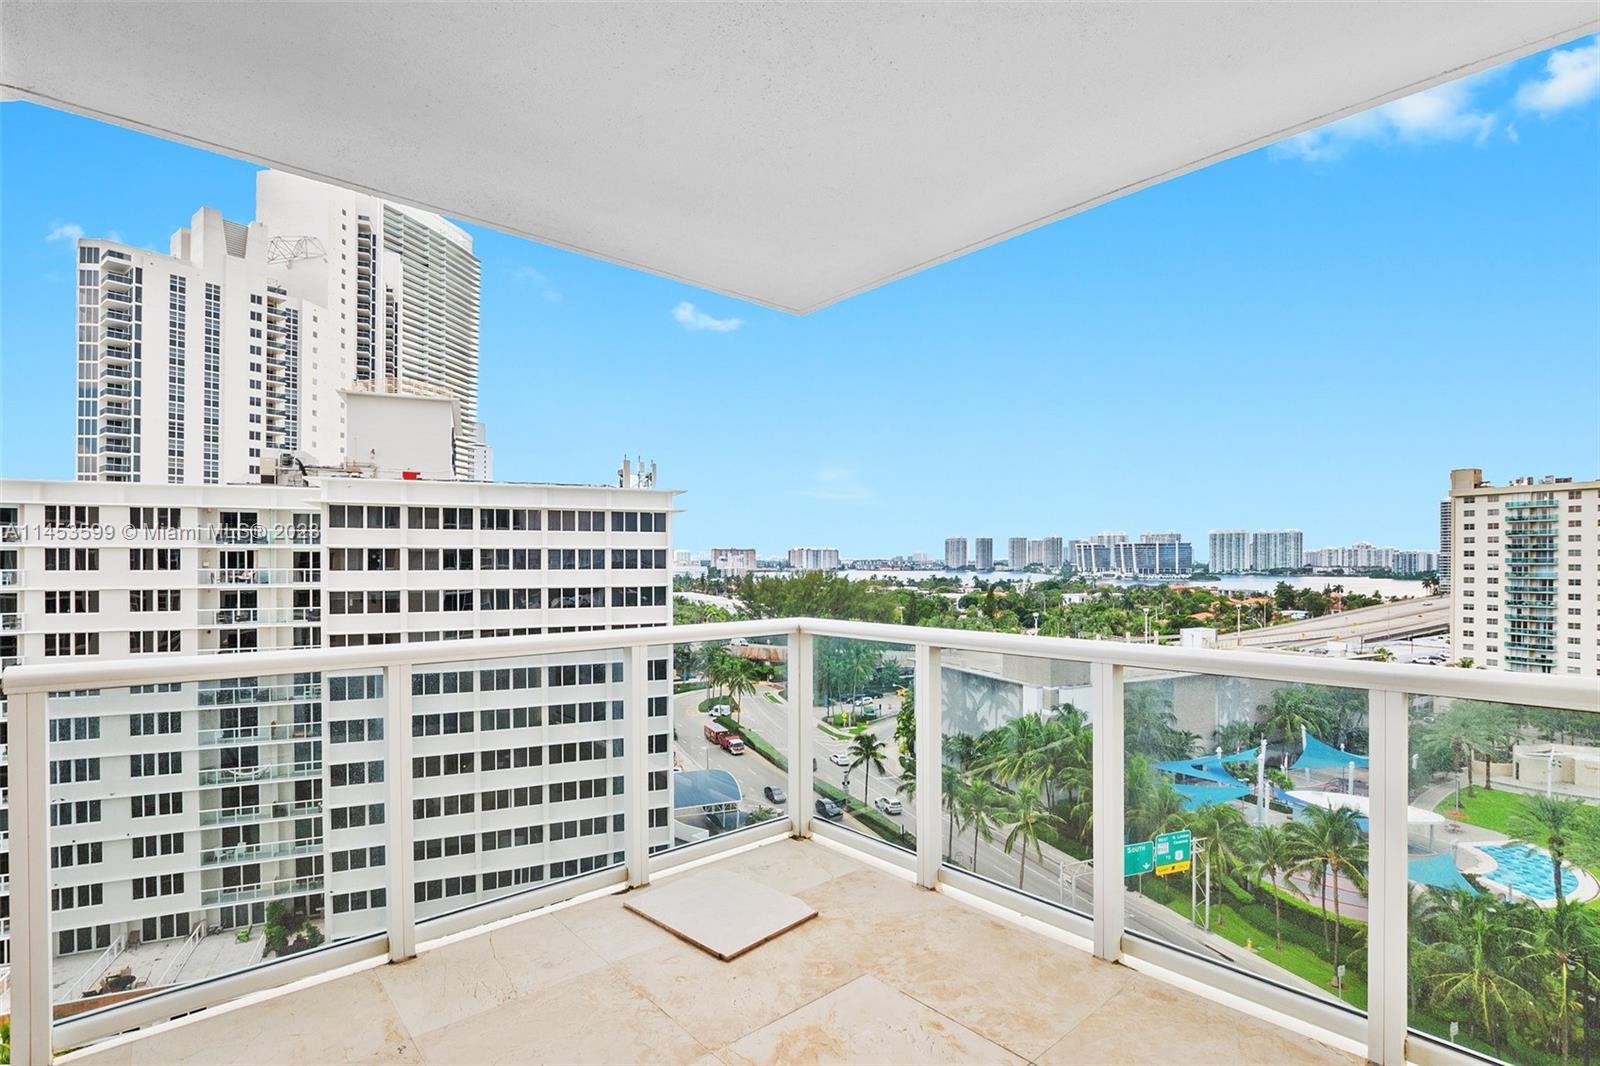 Fabulous 3 bdrm 4 full baths corner condo with the most spectacular sunset views in Sunny Isles Beach! 2,410 sq.ft per Ocean One plans! Large eat in kitchen, Great (living/dining) room surrounded by windows! One of the brightest apartments in the building! Master bedroom has his and hers walk in closets and bathroom, all bedrooms have en-suite facilities. Full service building with concierge, cafe, valet, gym, gym classes daily, beach service & more!